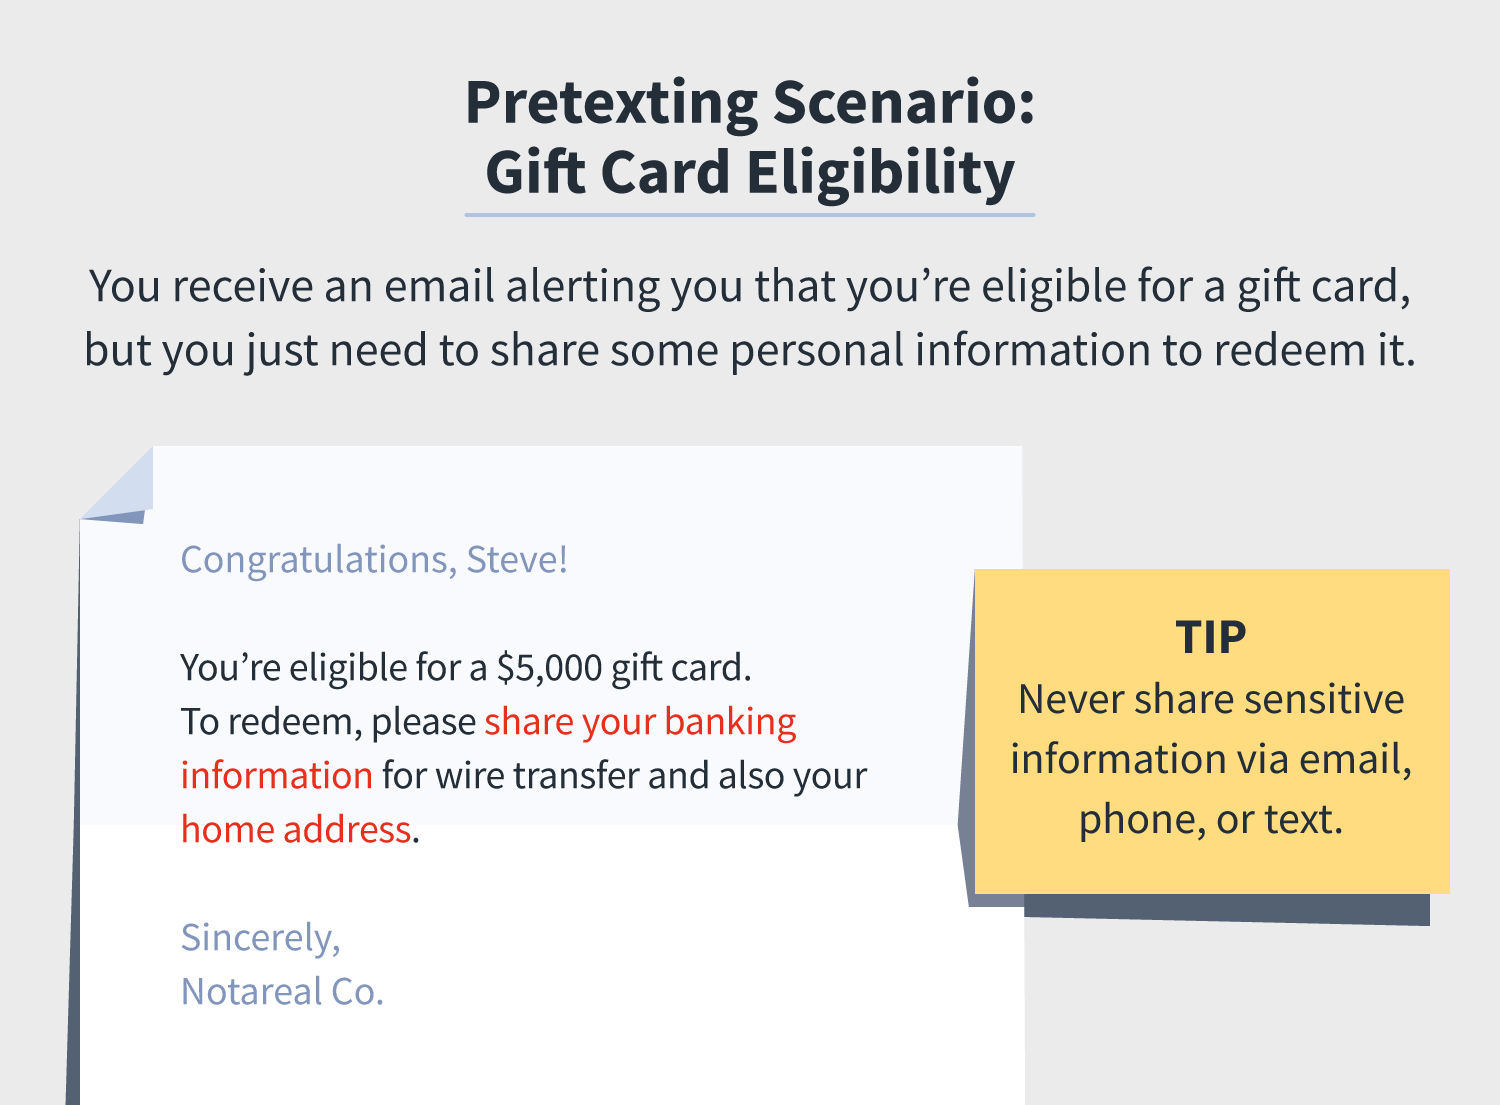 An illustration of an email that says, “You’re eligible for a $5,000 gift card. To redeem, please share your banking information for wire transfer and also your home address.” Tip: Never share sensitive information via email, phone or text. 